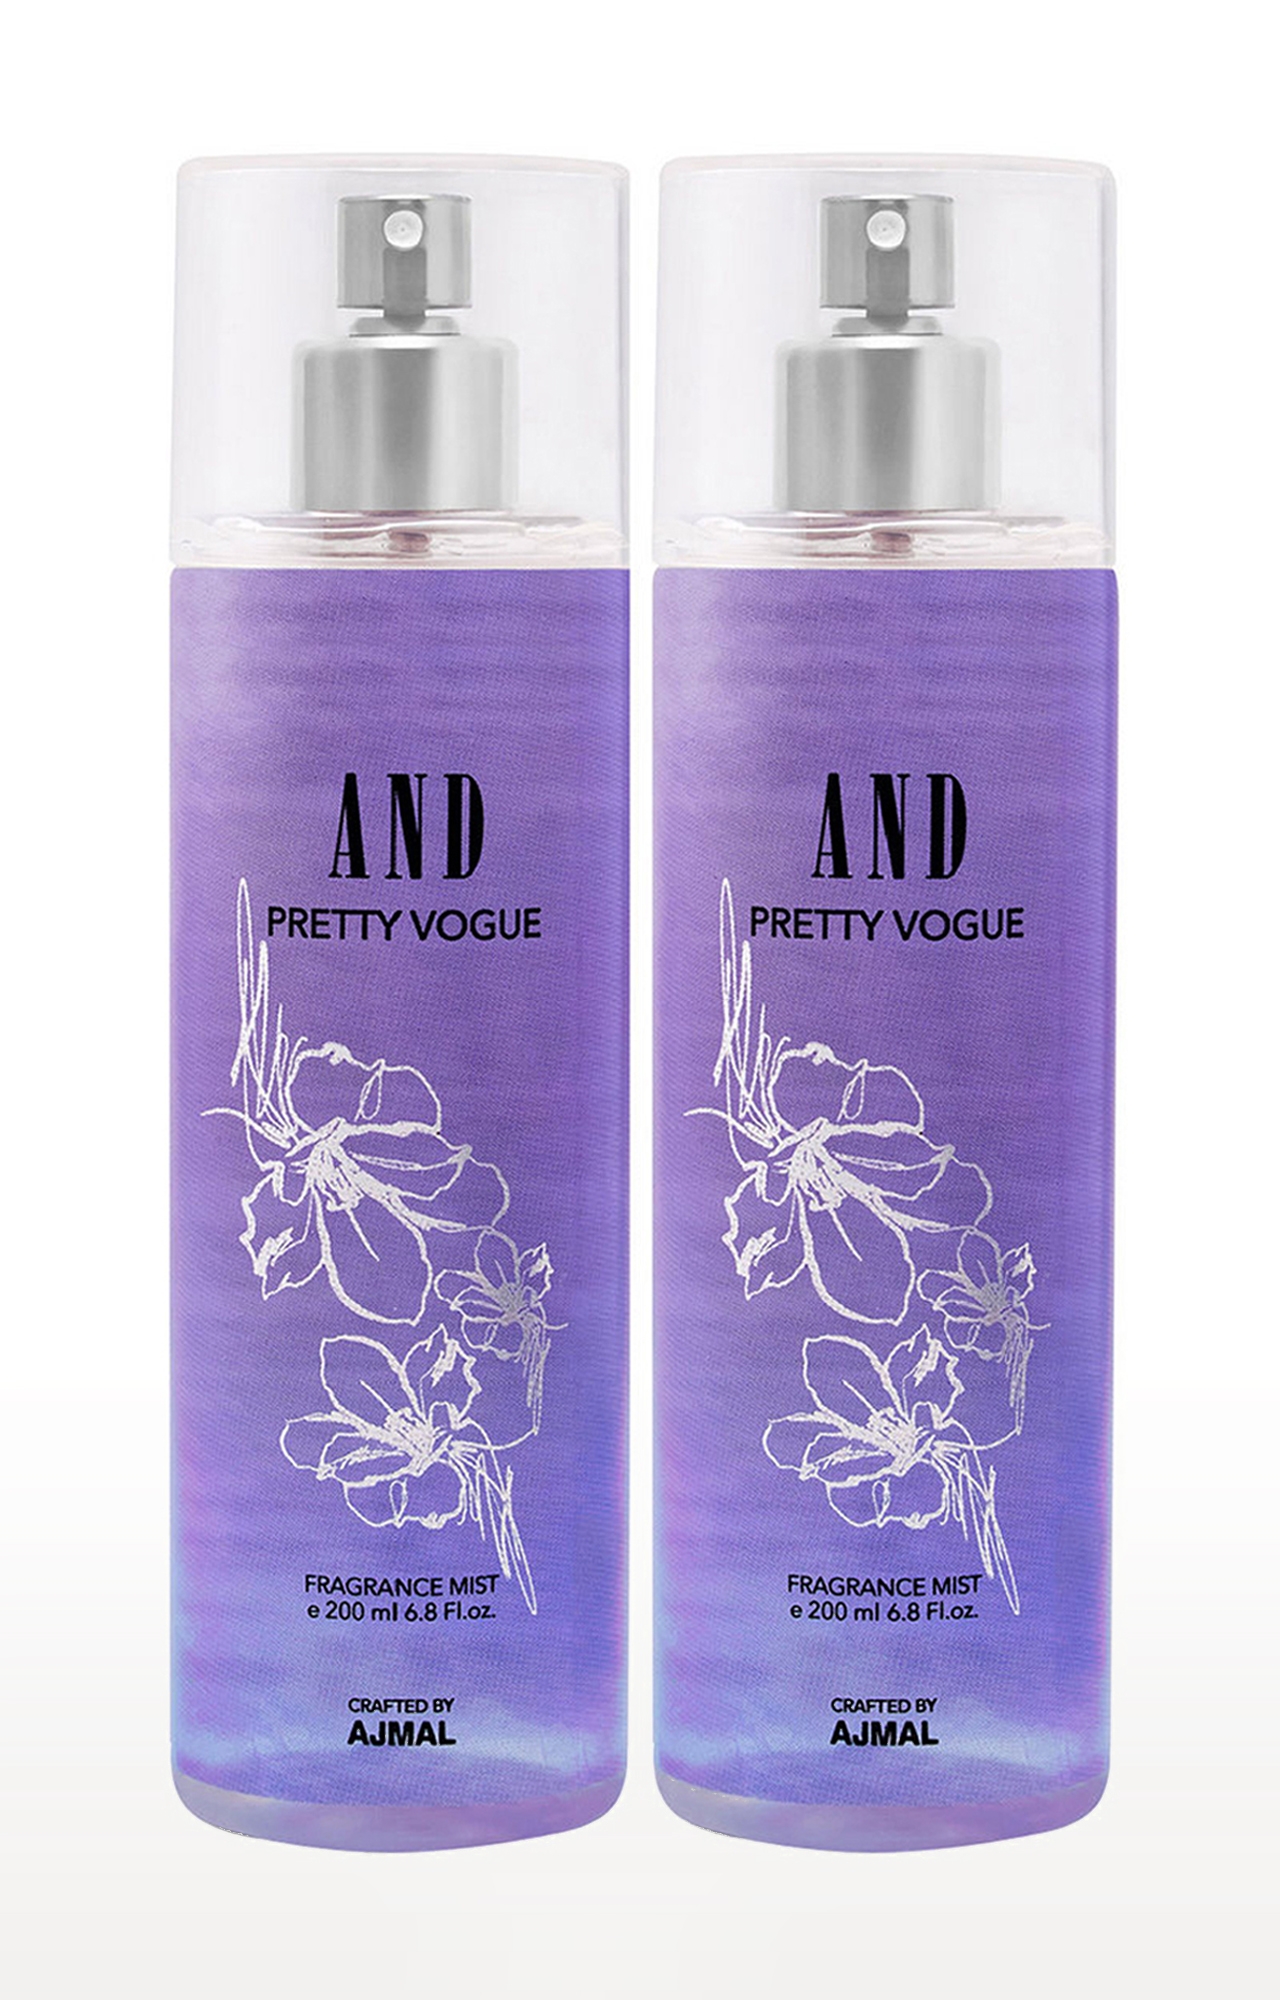 AND Crafted By Ajmal | AND Pretty Vogue Pack of 2 Body Mist 200ML each Long Lasting Scent Spray Gift for Women Perfume Crafted by Ajmal FREE 0